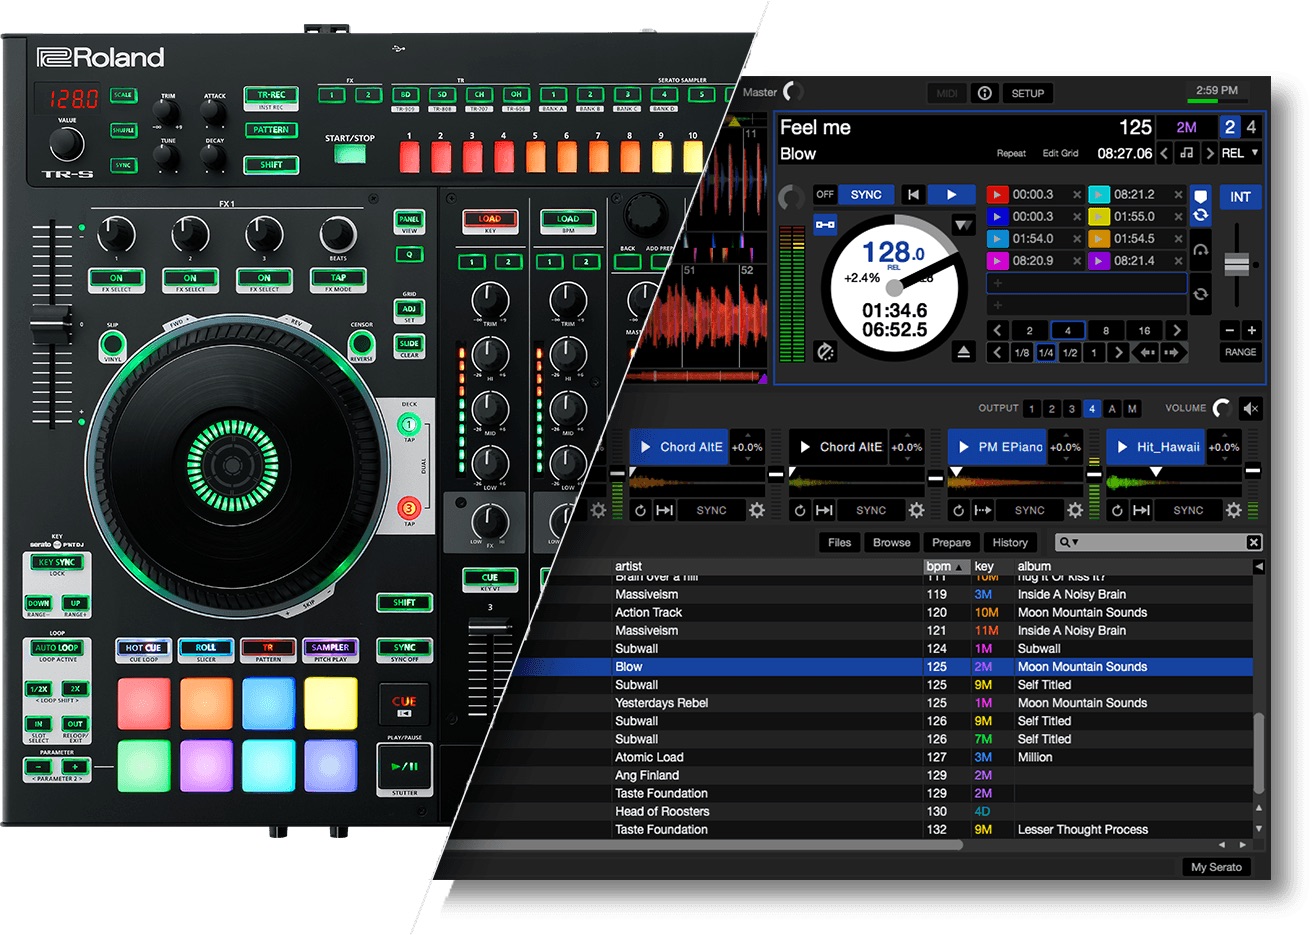 Everything You Need To Know About Roland's DJ-808 Serato 